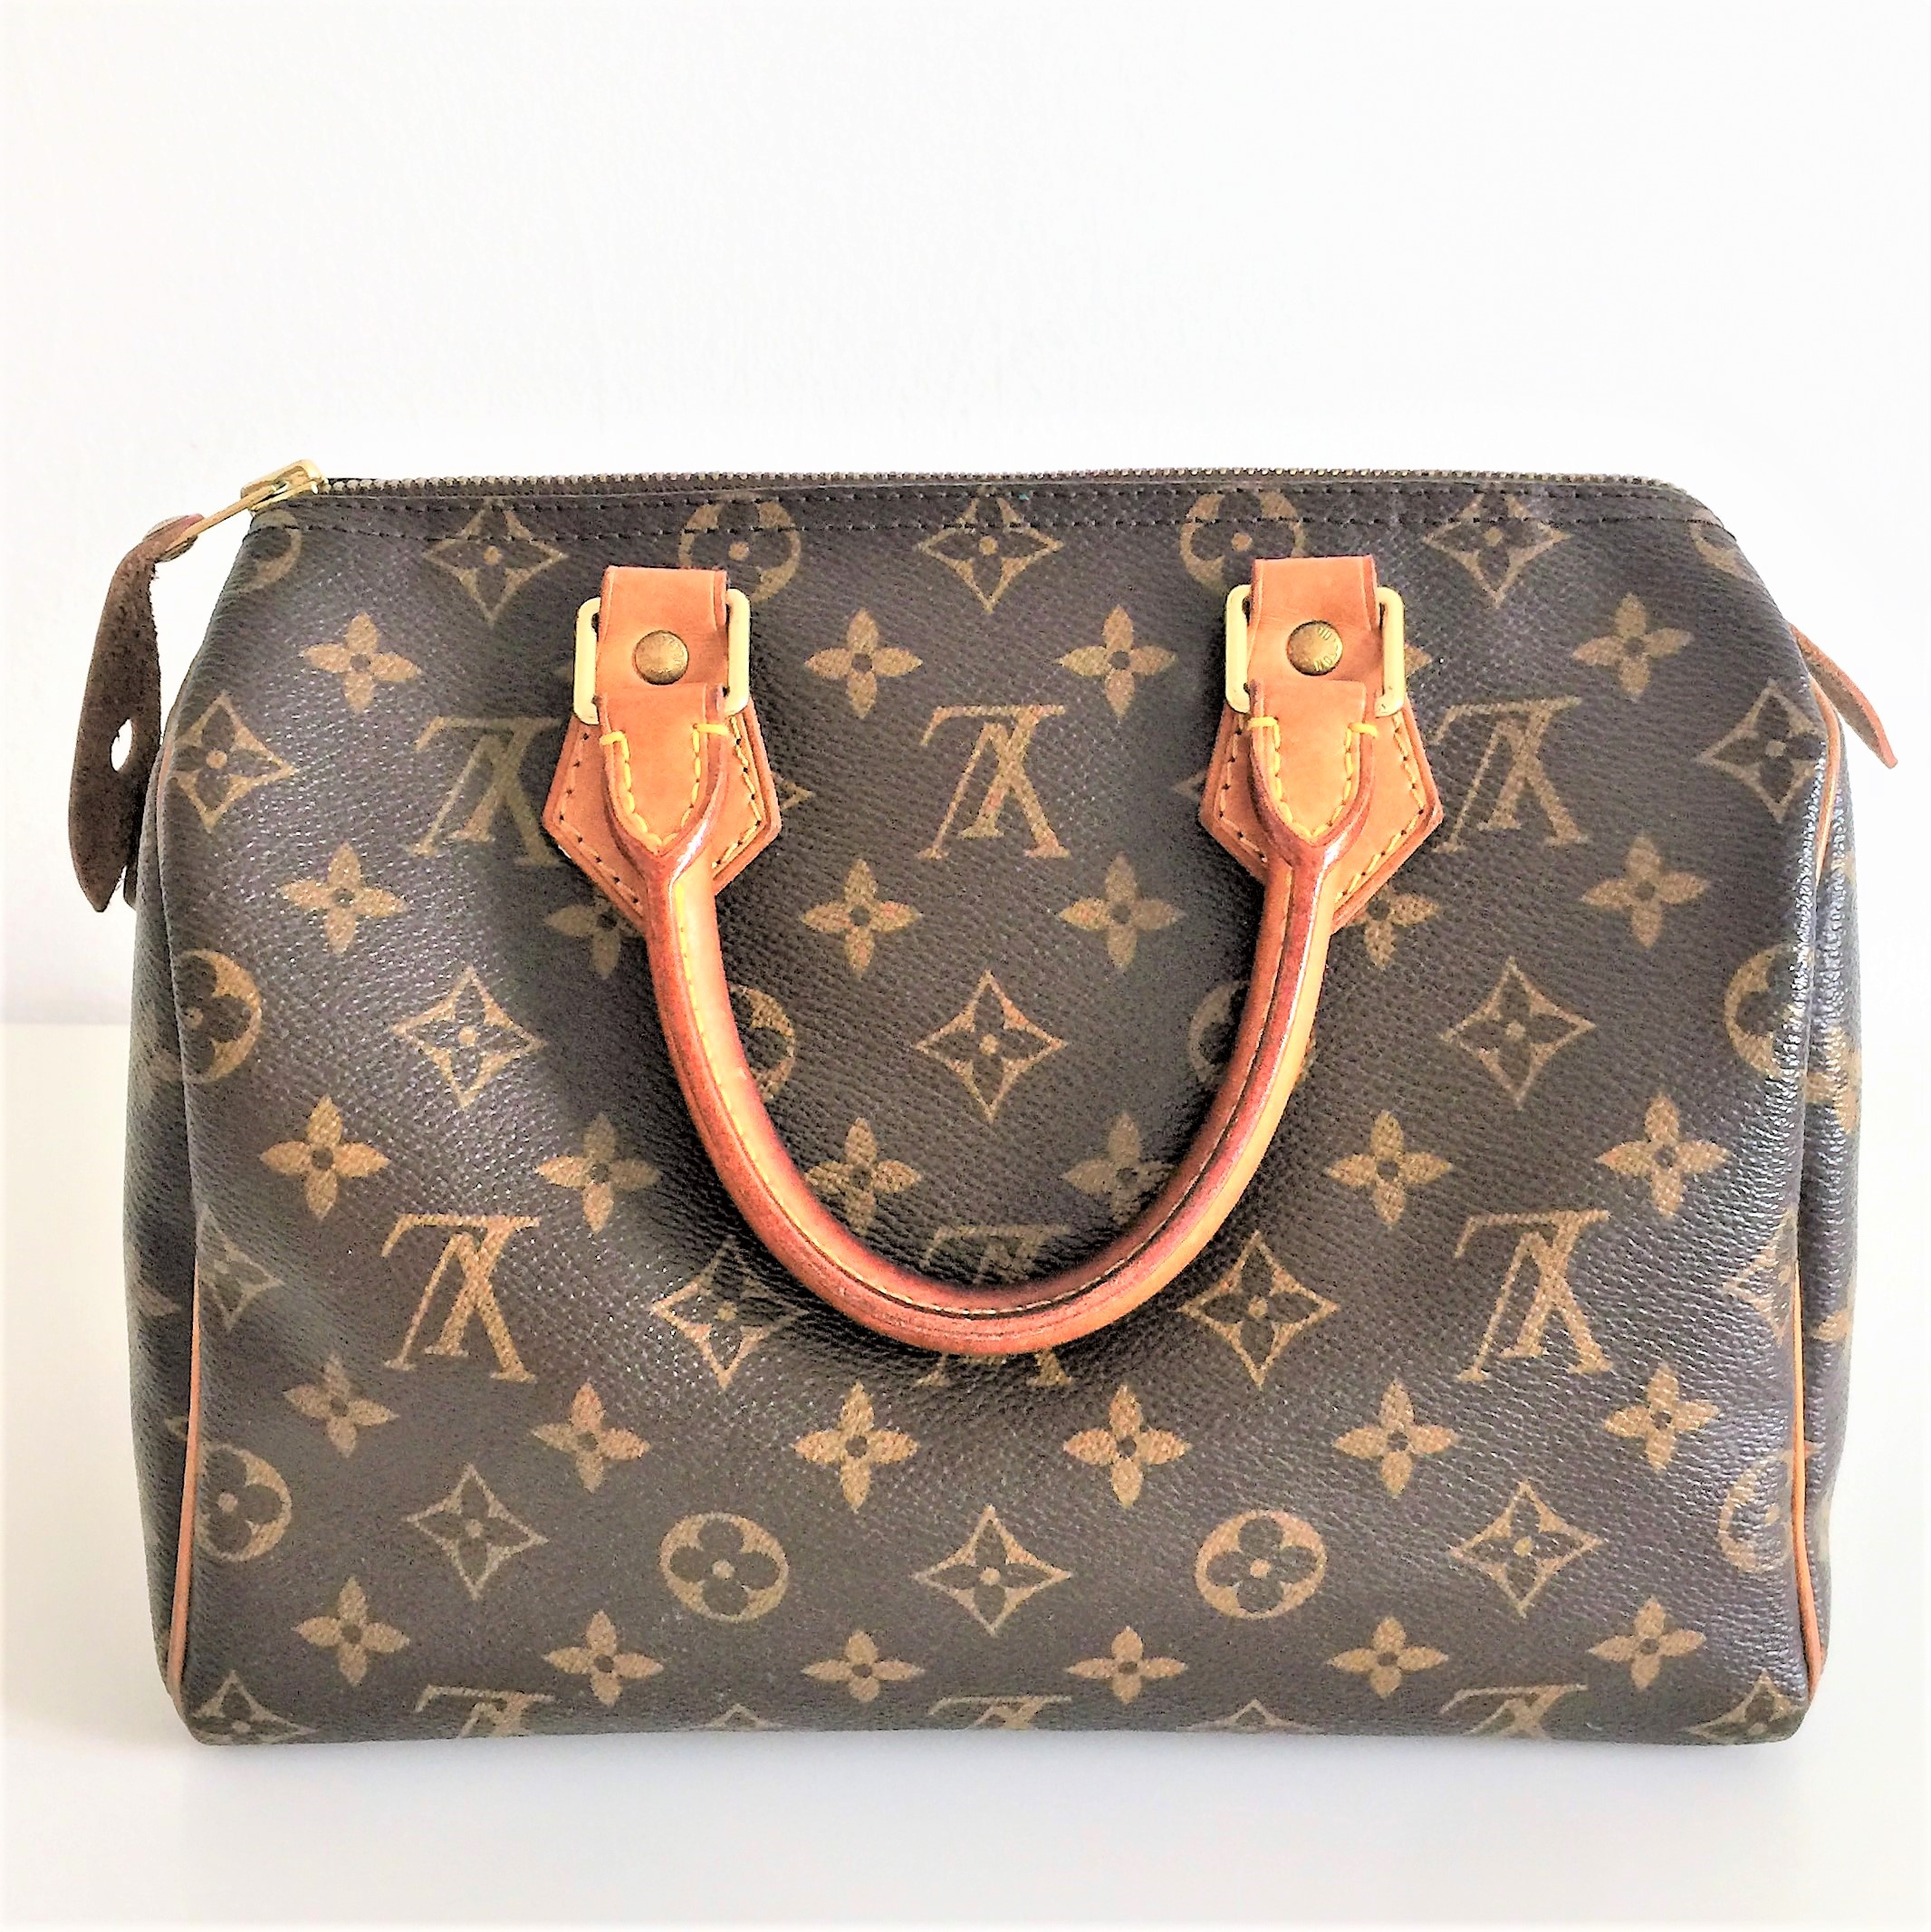 JUST IN: Louis Vuitton Tivoli PM 🤎 - WHAT 2 WEAR of SWFL